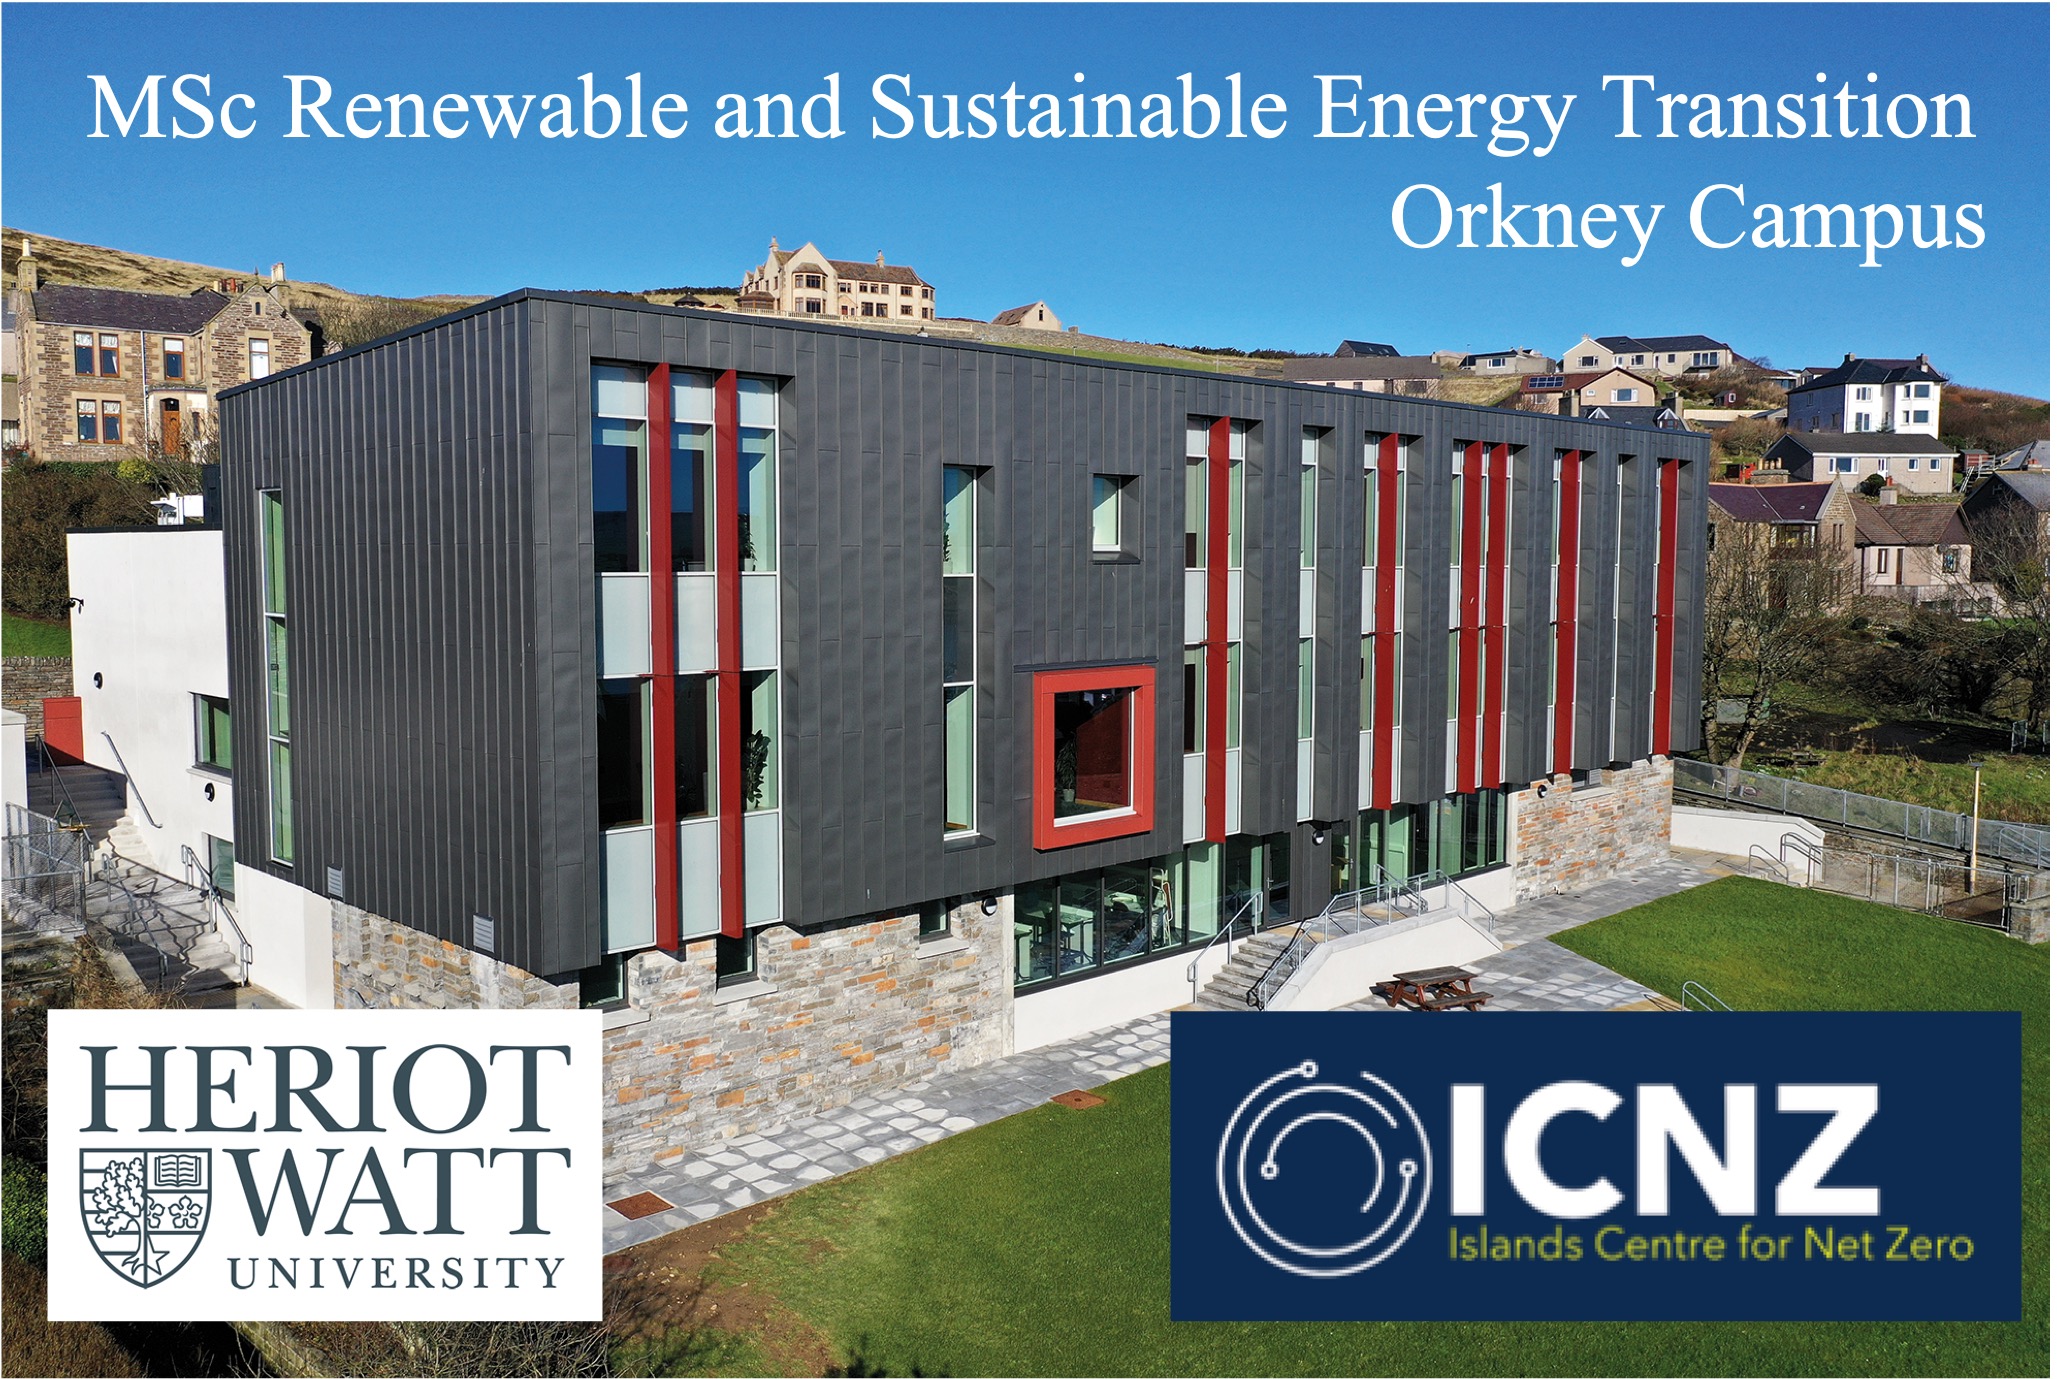 MSc Renewable and Sustainable Energy Transition